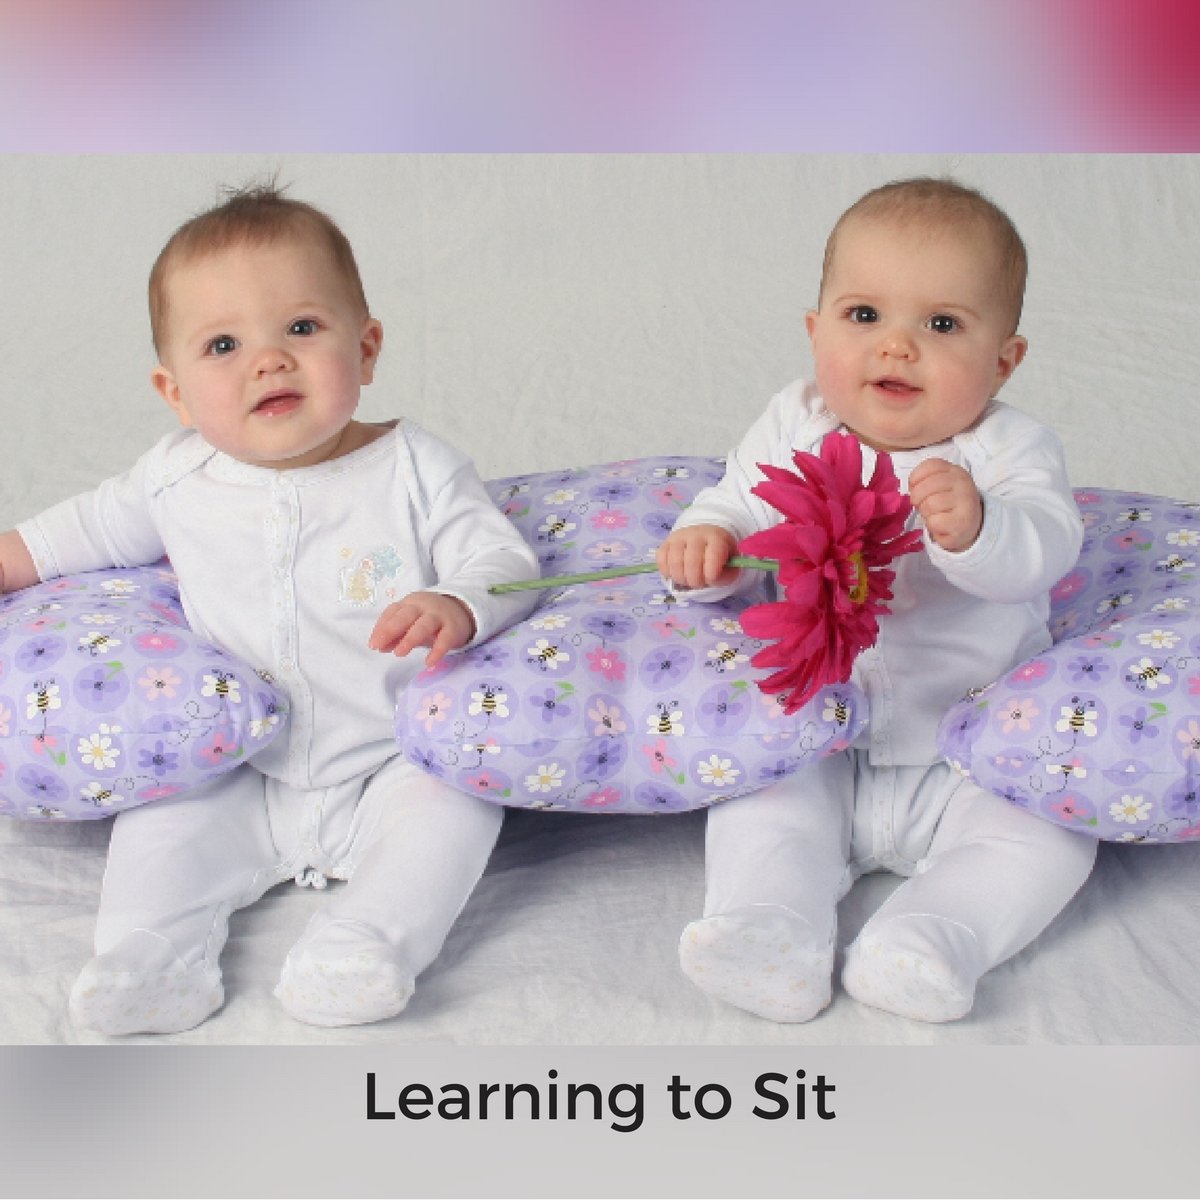 https://twinsandmore.co/wp-content/uploads/2018/04/Twin-Z-Pillow-Learning-to-sit.jpg